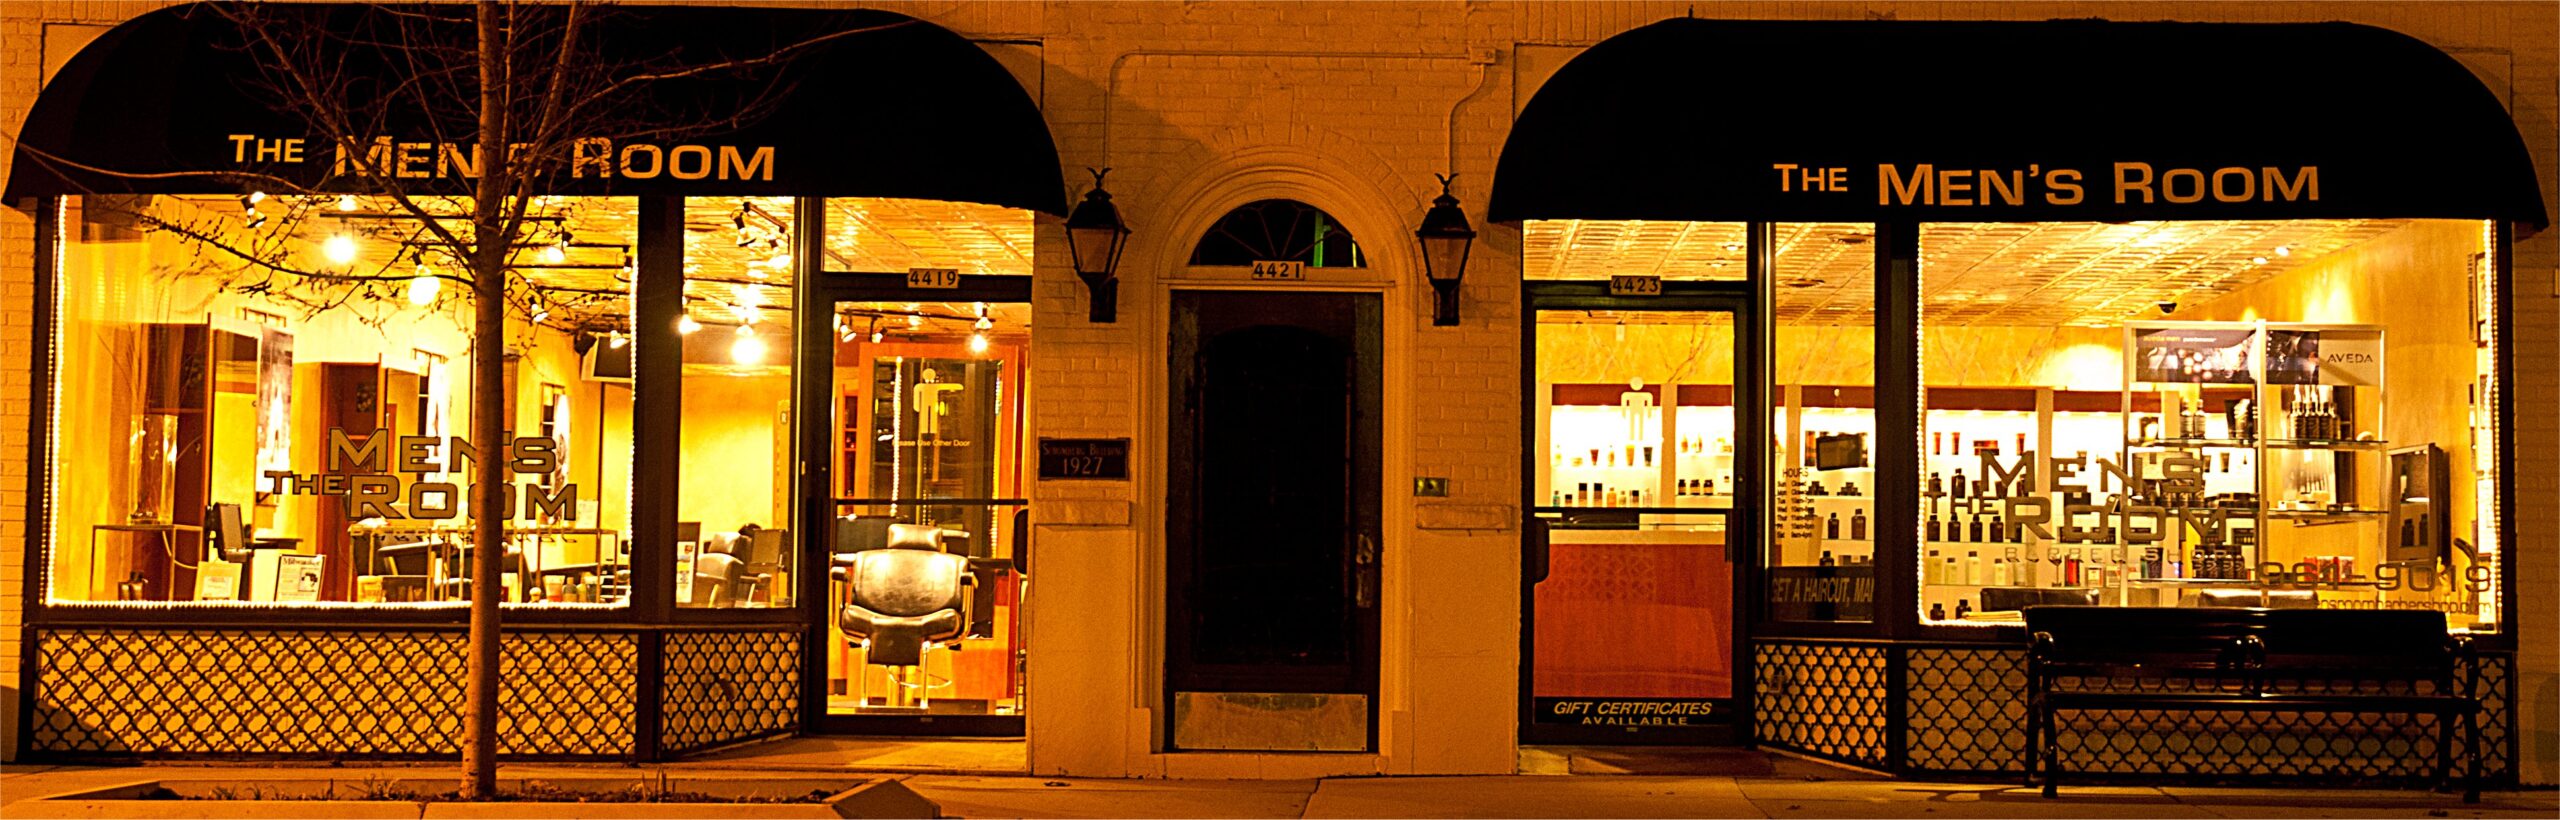 storefront-at-night-II-5a54a1571bb30